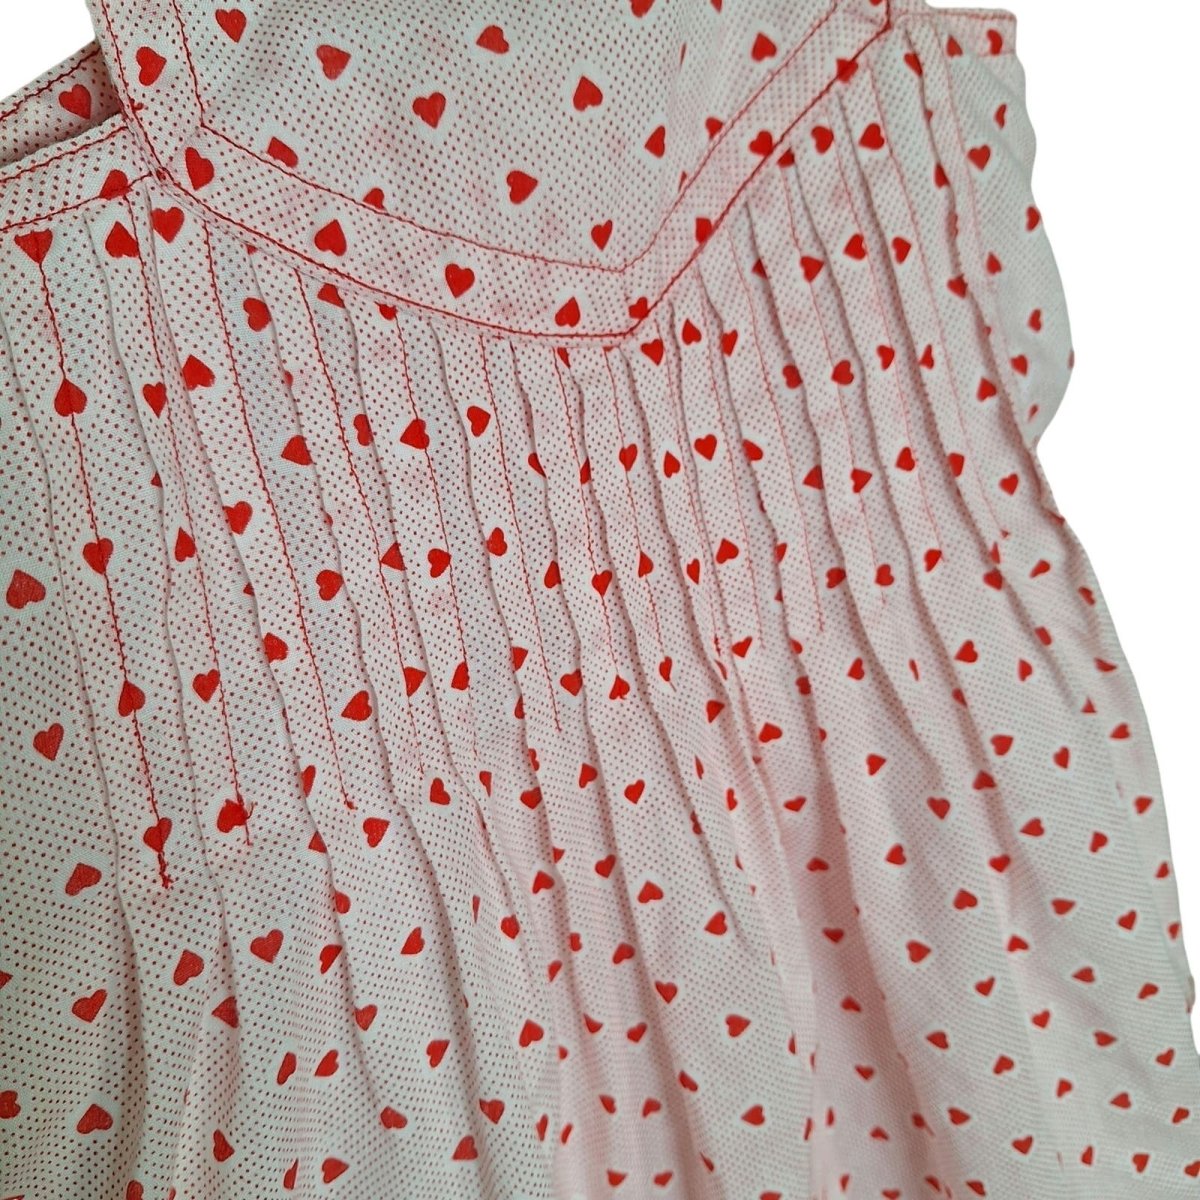 Vintage 70s/80s Heart Print Maxi Sundress Toddler Girls up to size 4 Waist/Chest 23" - themallvintage The Mall Vintage